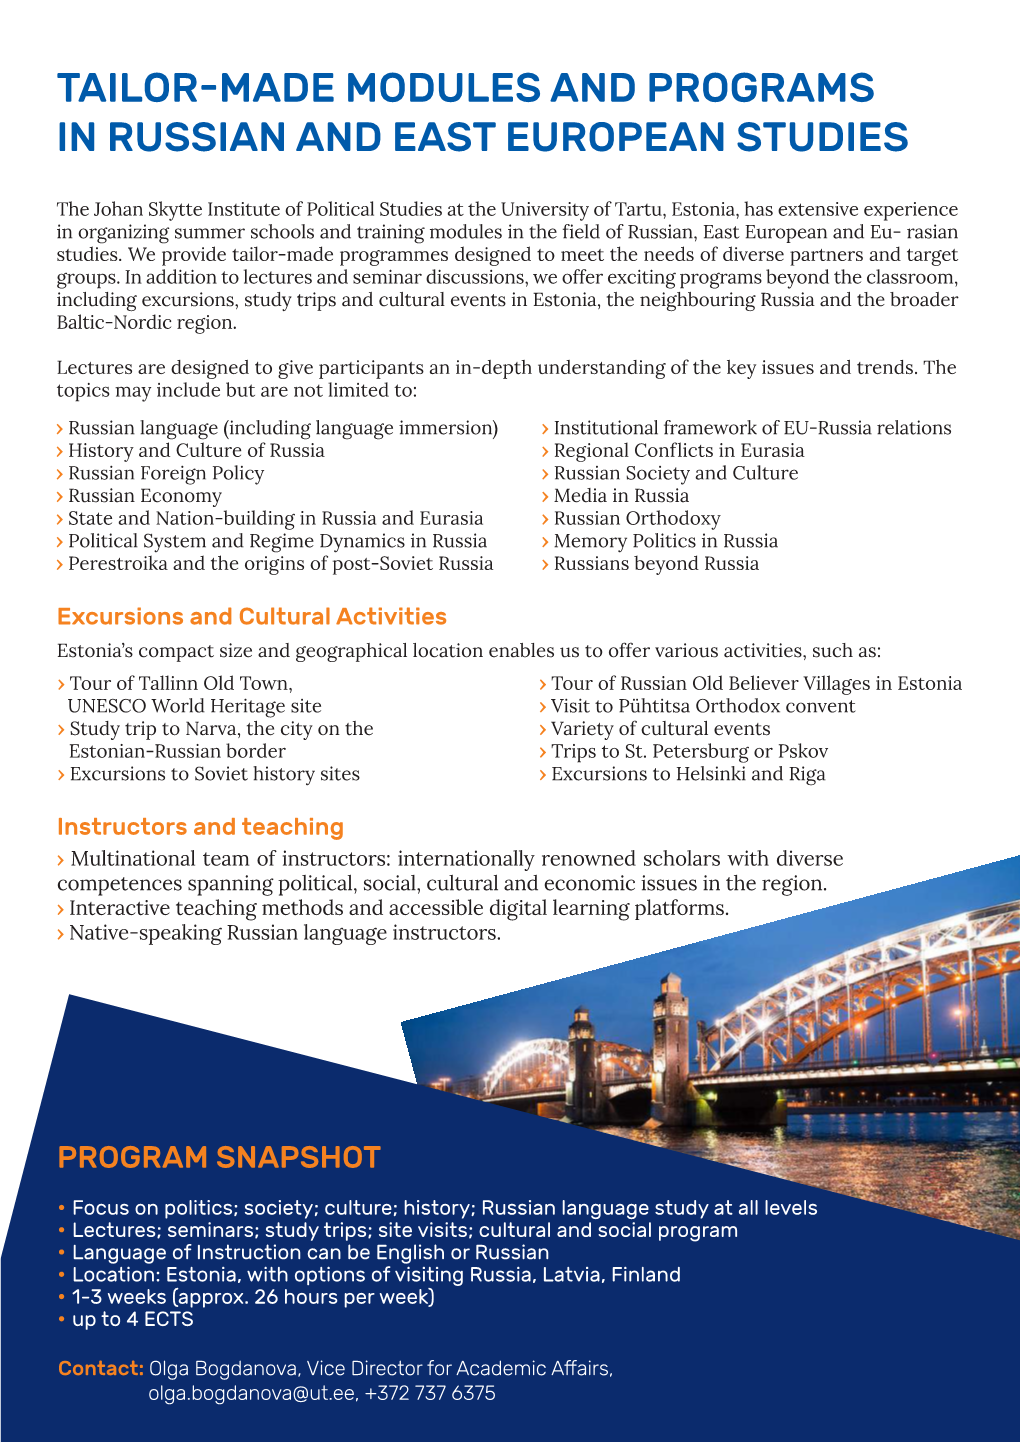 Tailor-Made Modules and Programs in Russian and East European Studies